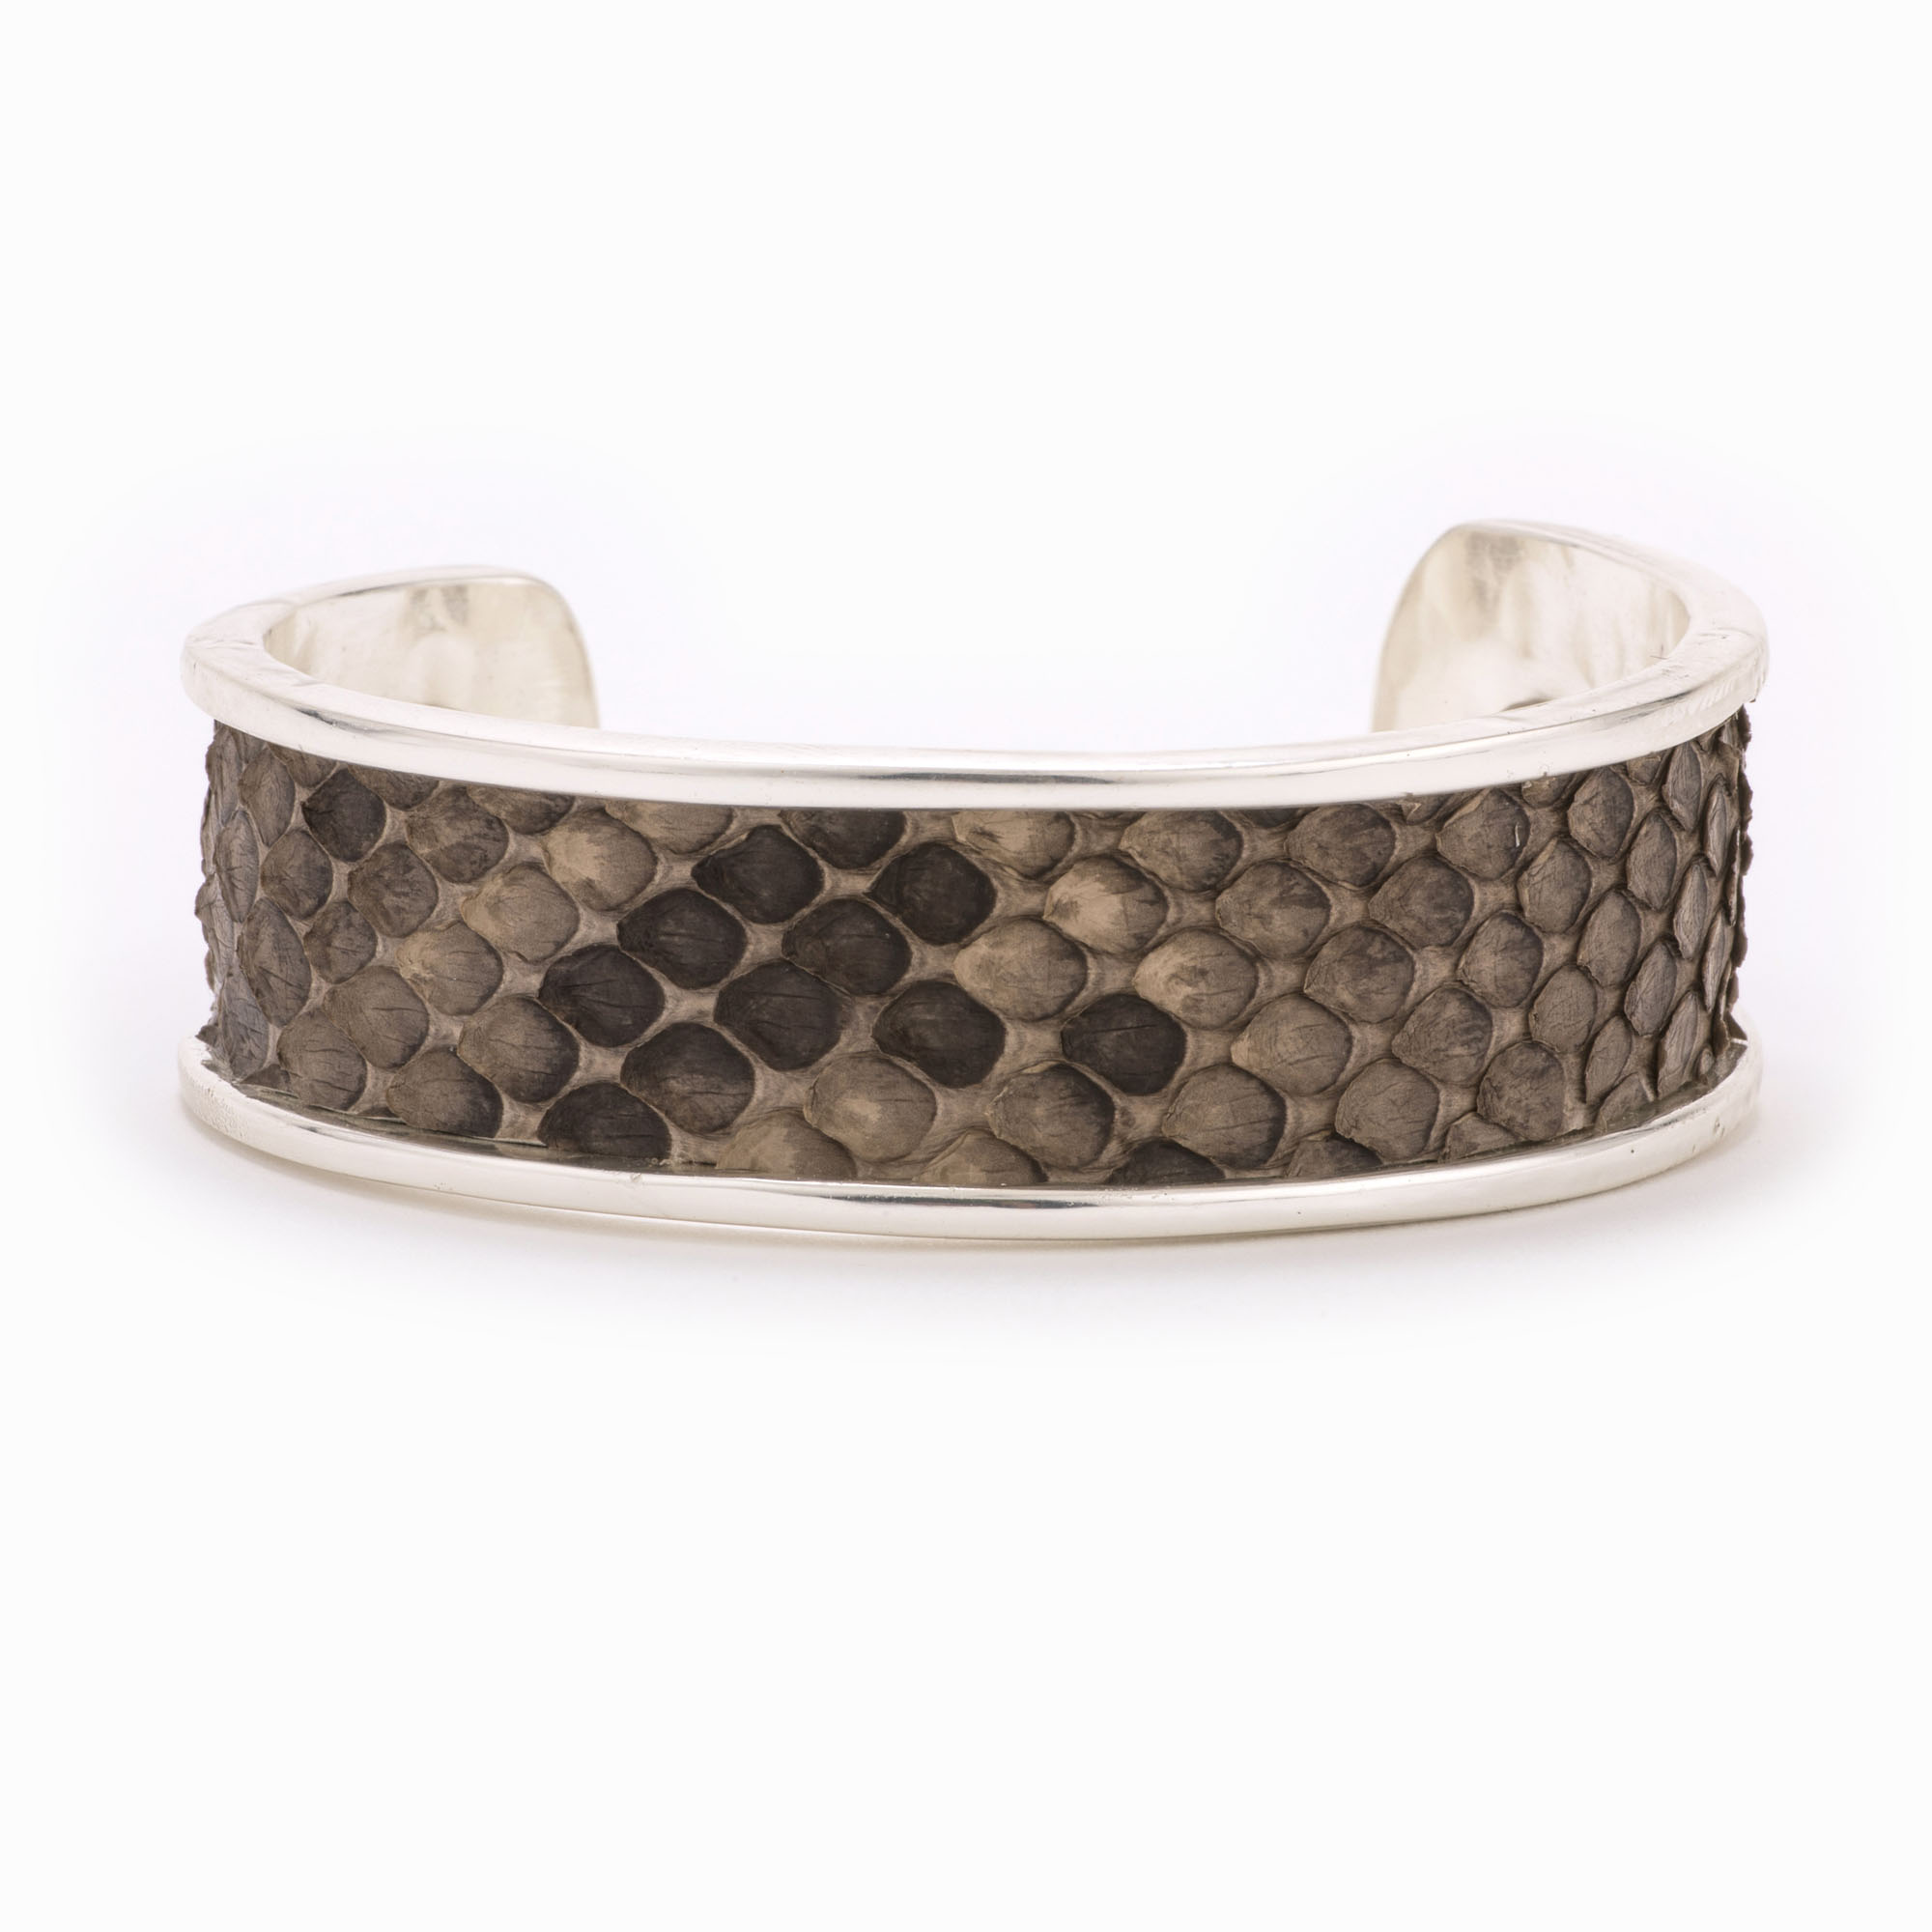 A medium silver cuff with grey and brown colored snakeskin pattern inlaid.